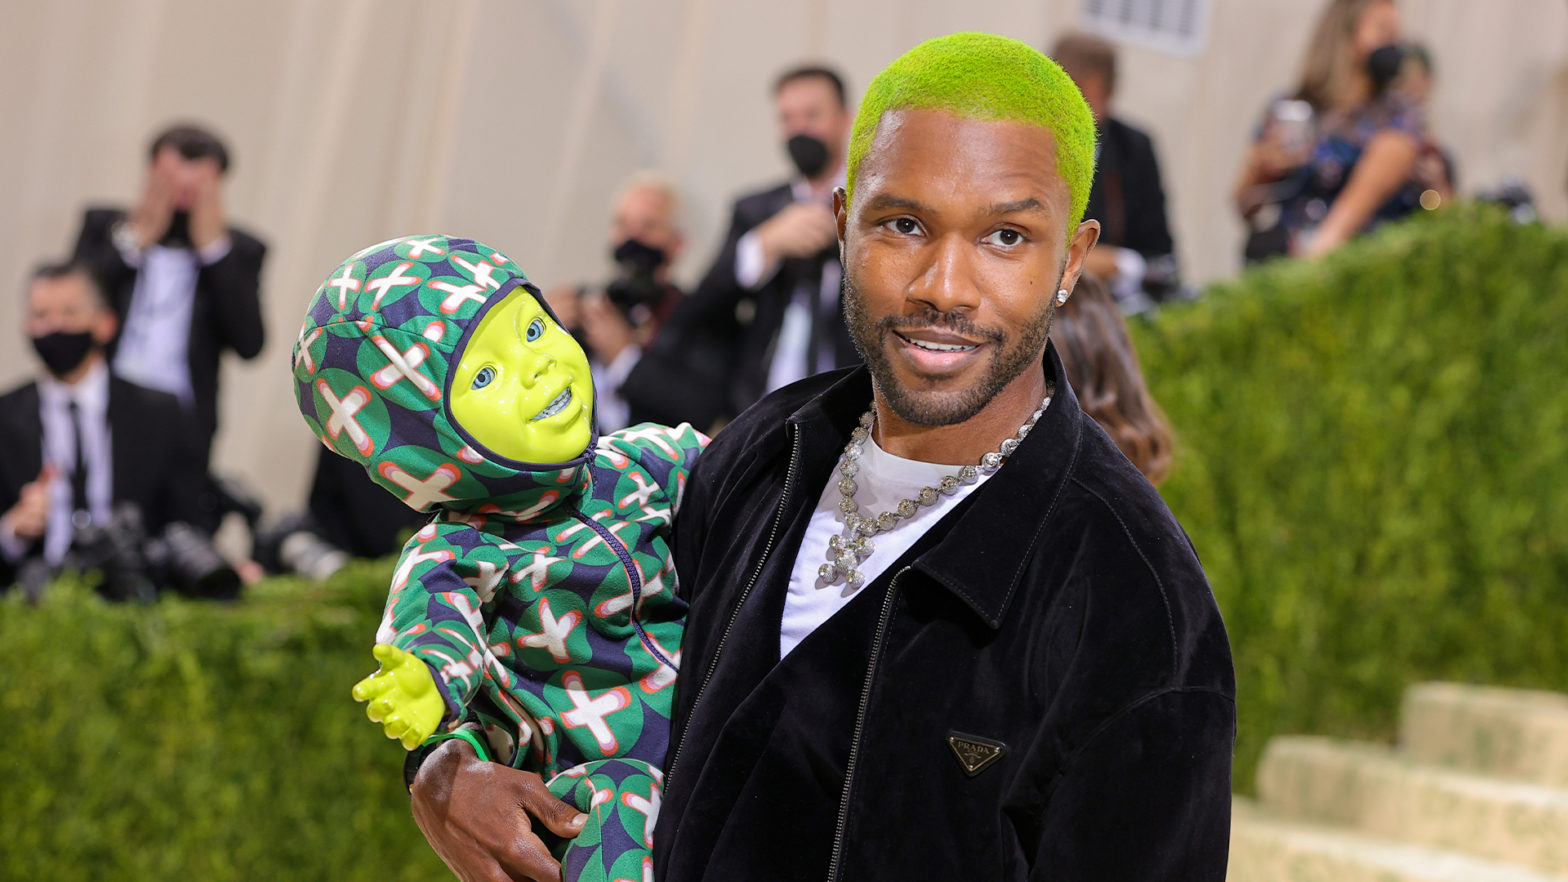 Discord User Rakes In Nearly $10K After Misleading Frank Ocean Fans With AI-Generated Music